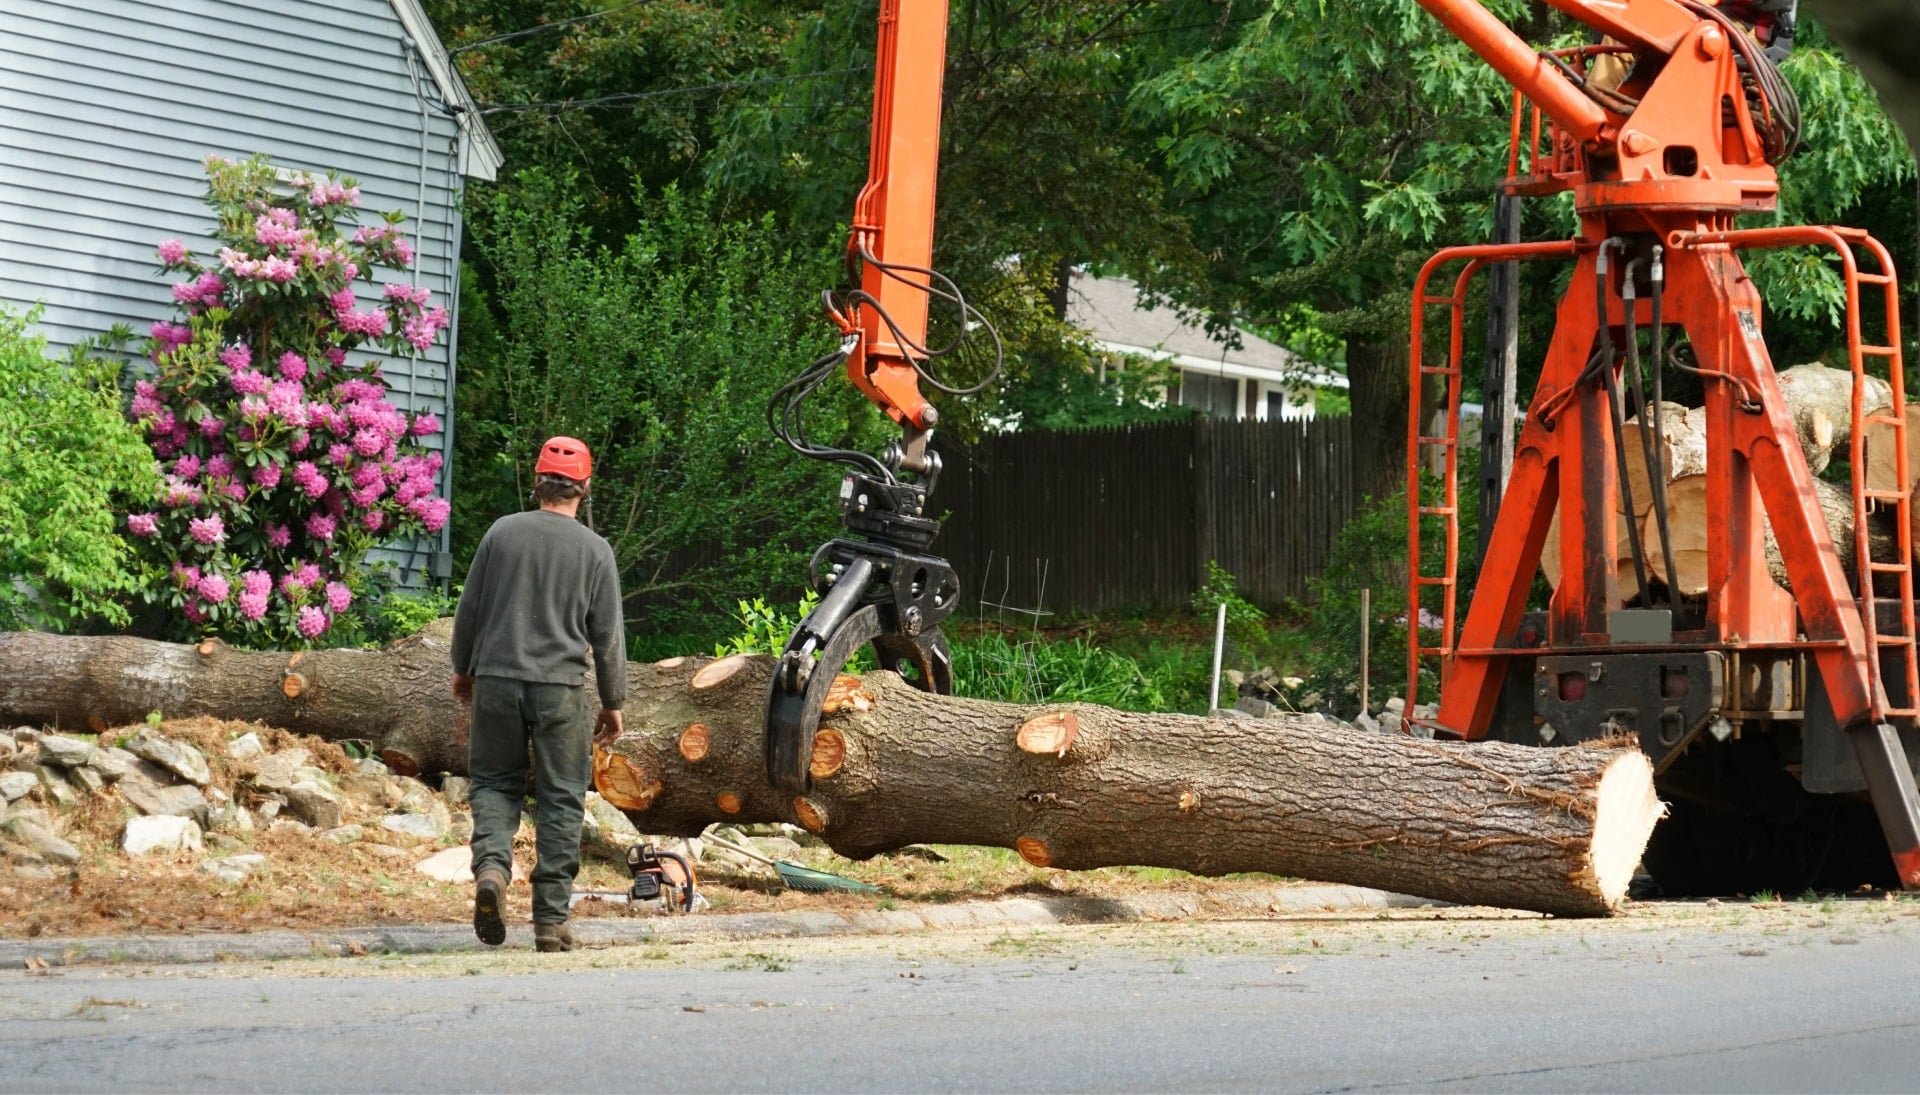 Local partner for Tree removal services in Katy